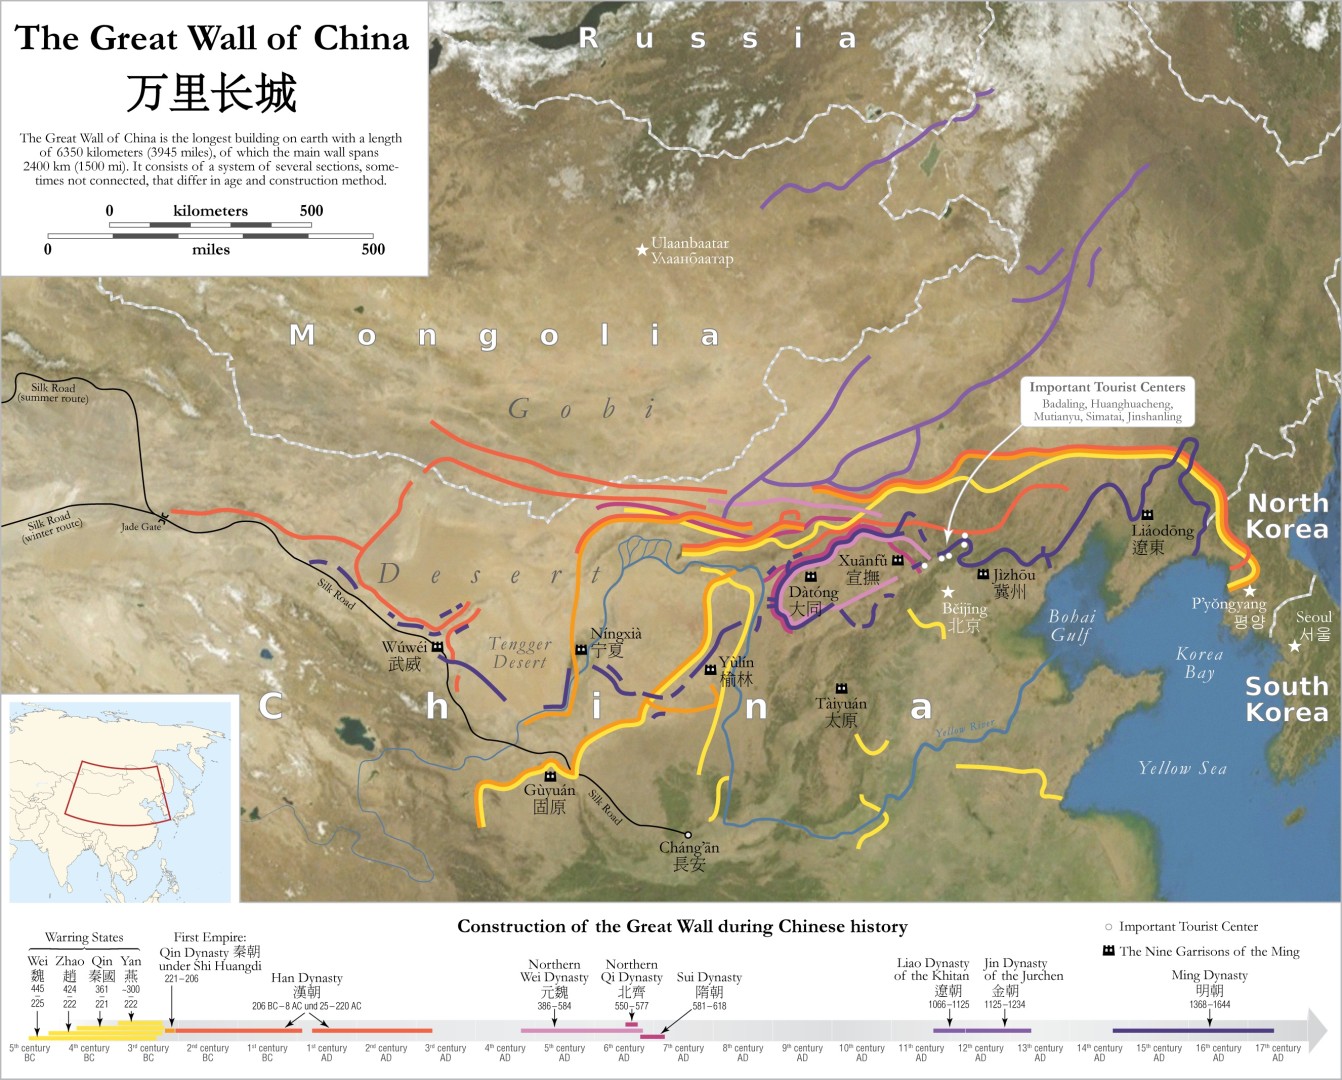 Great Wall of China Sections